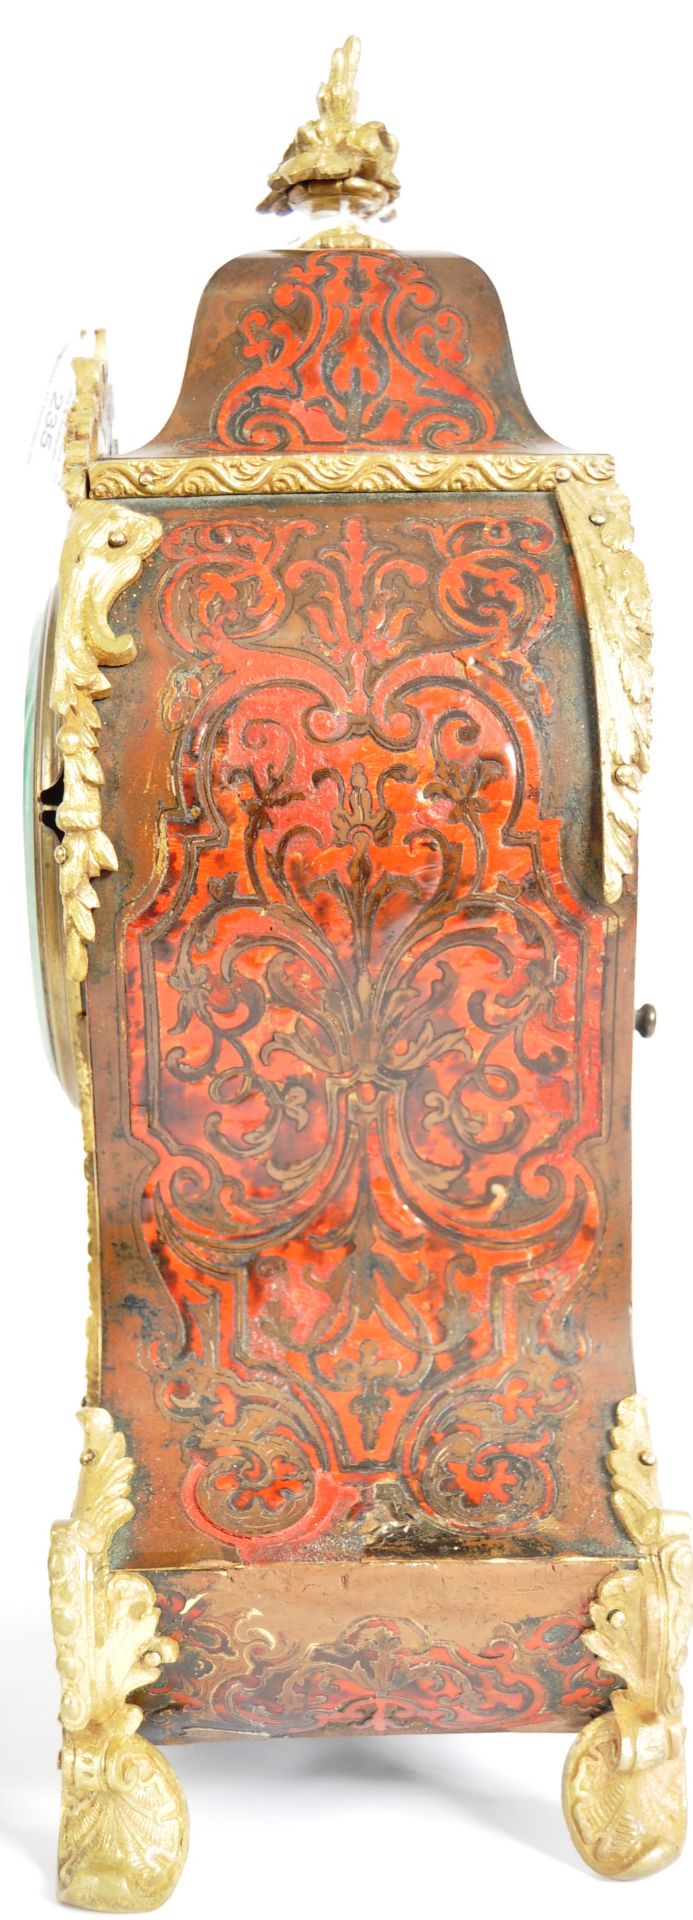 19TH CENTURY FRENCH BOULLE WORK MANTEL CLOCK - Image 7 of 7